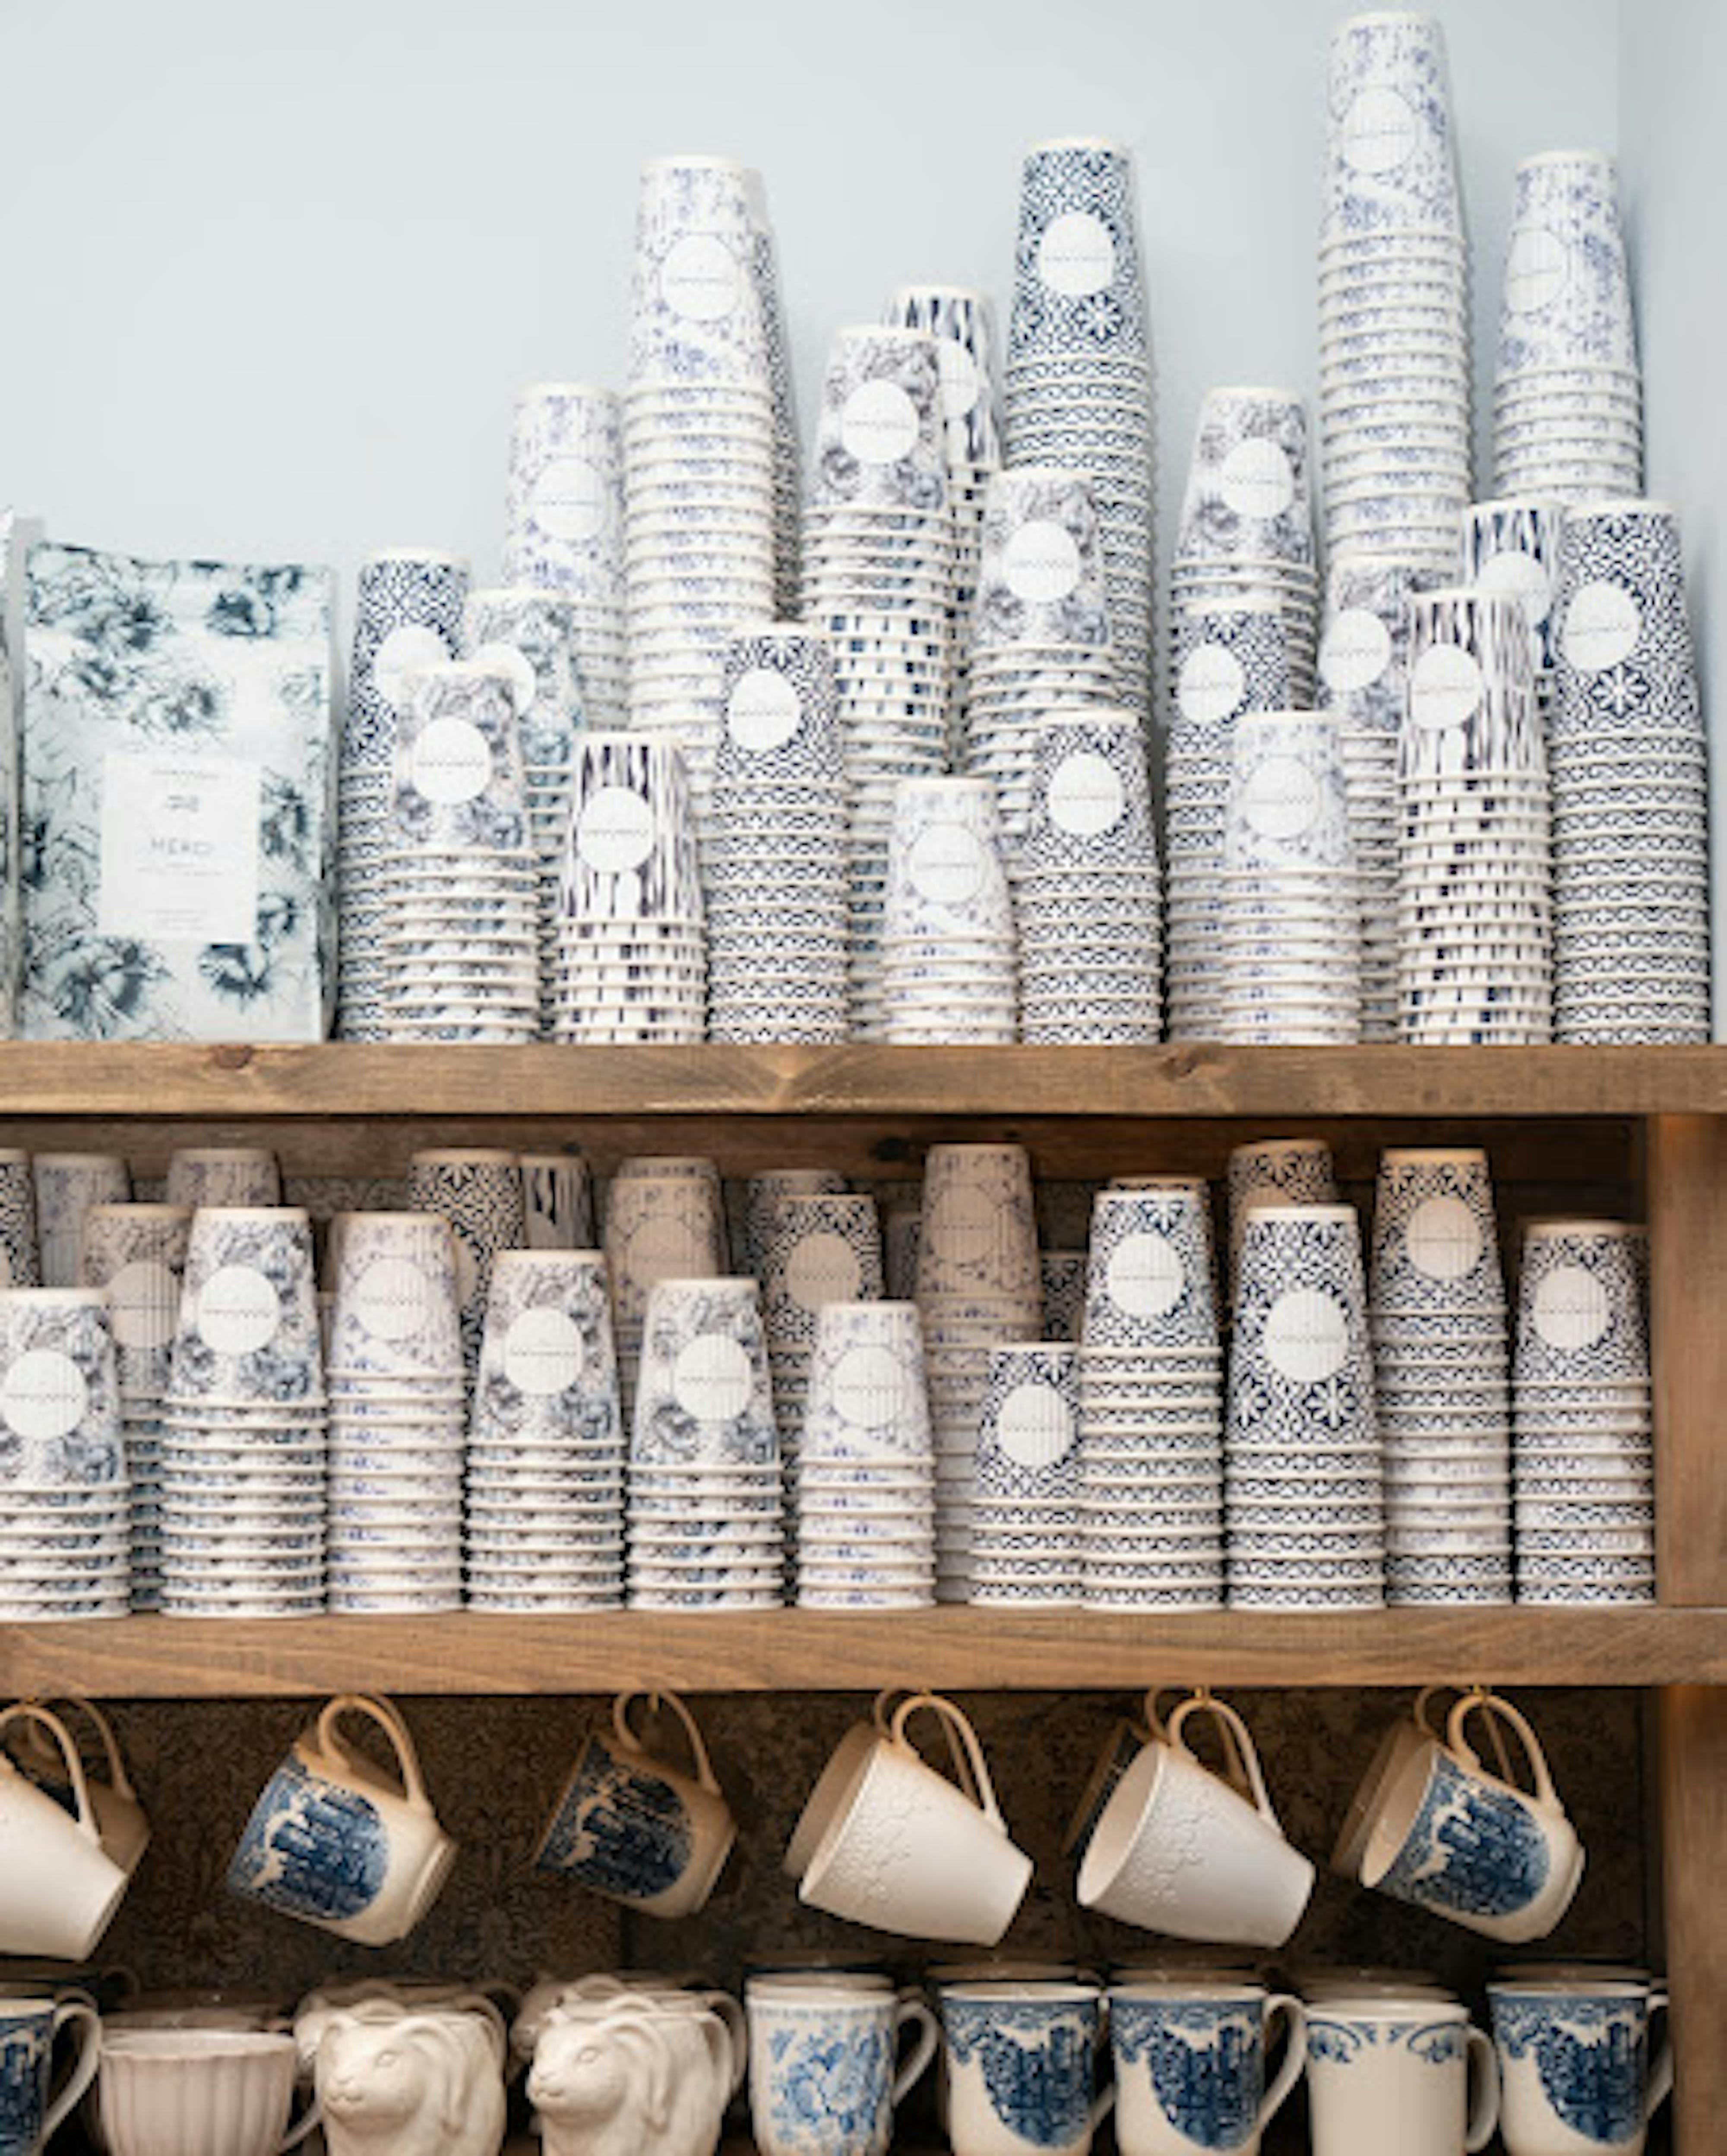 maman's signature to-go coffee cups displayed on open shelfing